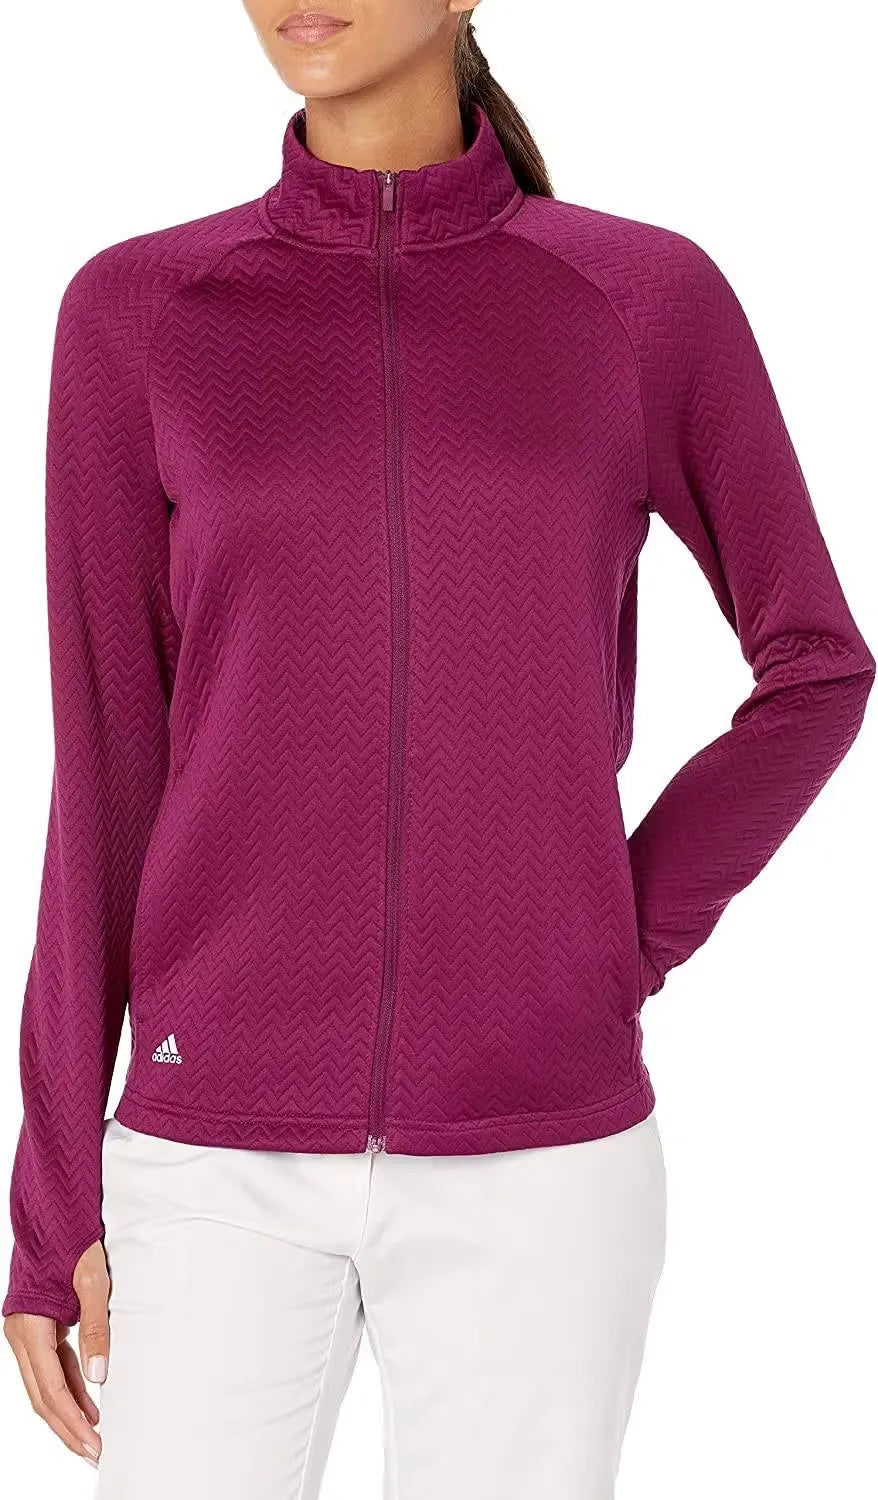 Adidas Women Full Zip Jacket with Textured Design - Elevate Your Outerwear Game